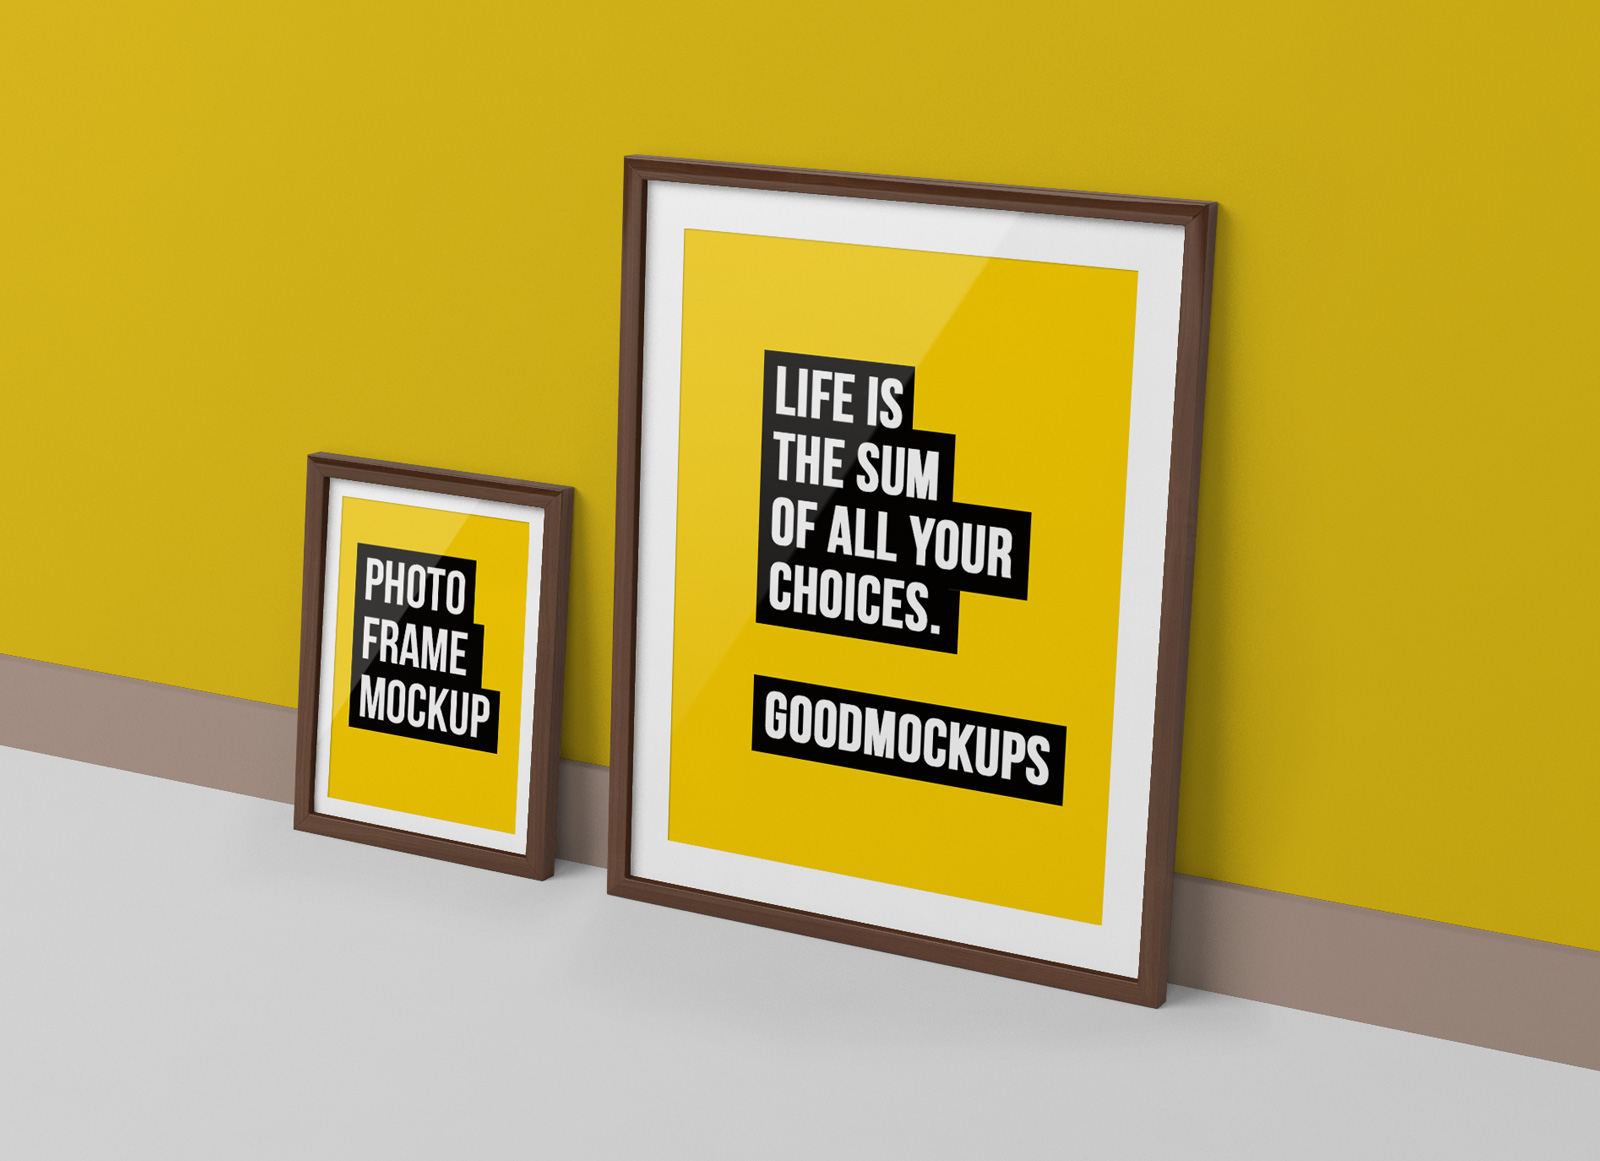 Free-Photo-Frame-Mockup-PSD-for-Lettering,-Photos-&-Typography-2